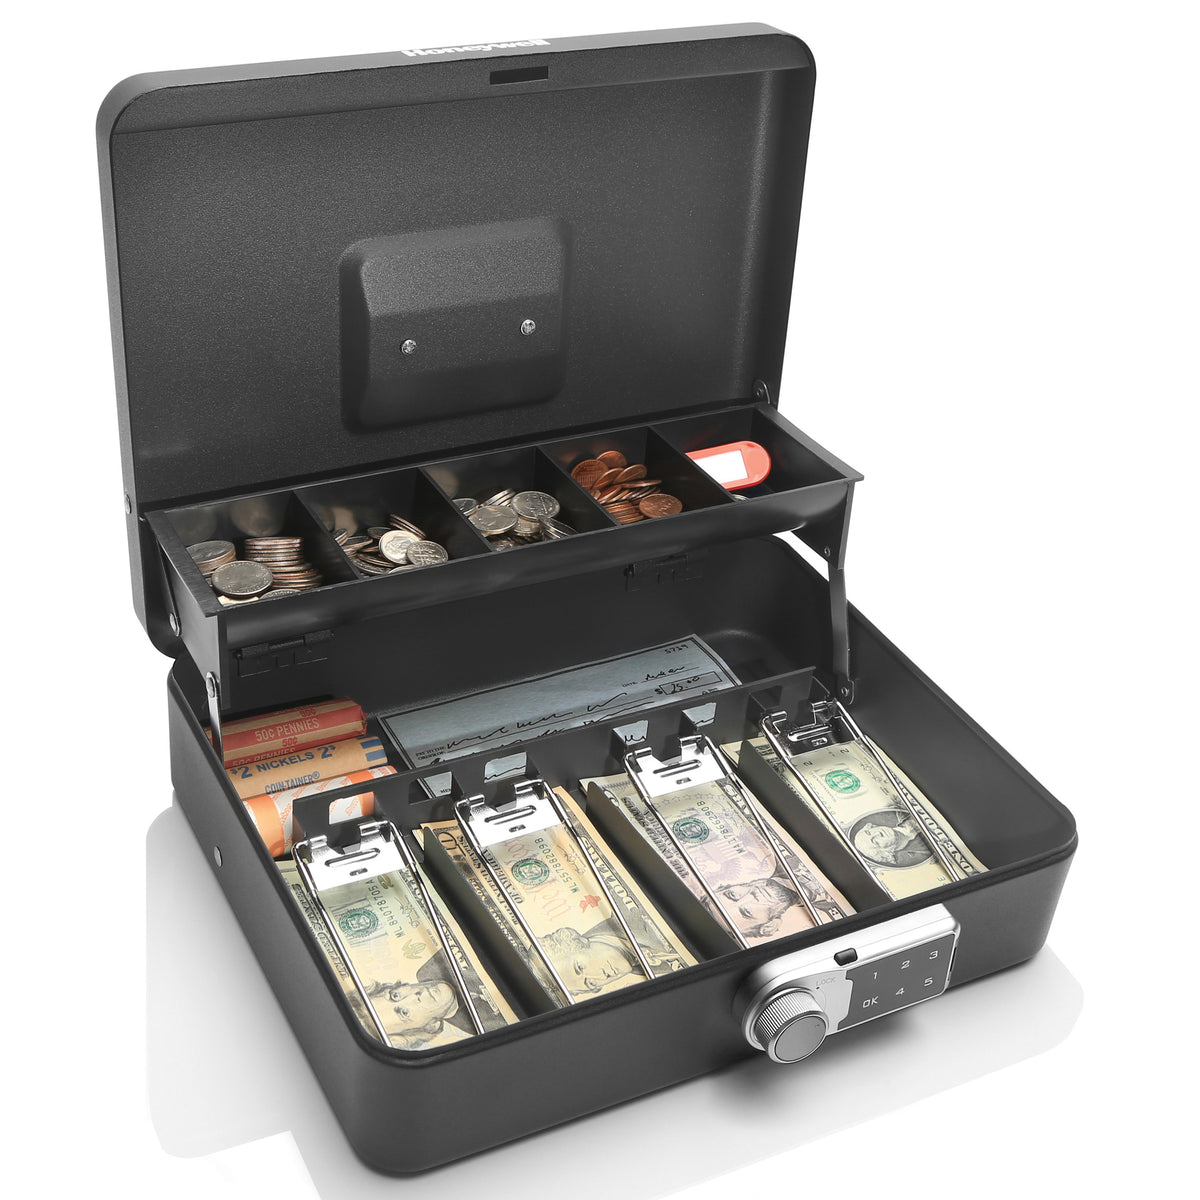 Honeywell 6213DG Digital Tiered Cash Box with Touchpad Lock Open with Cash